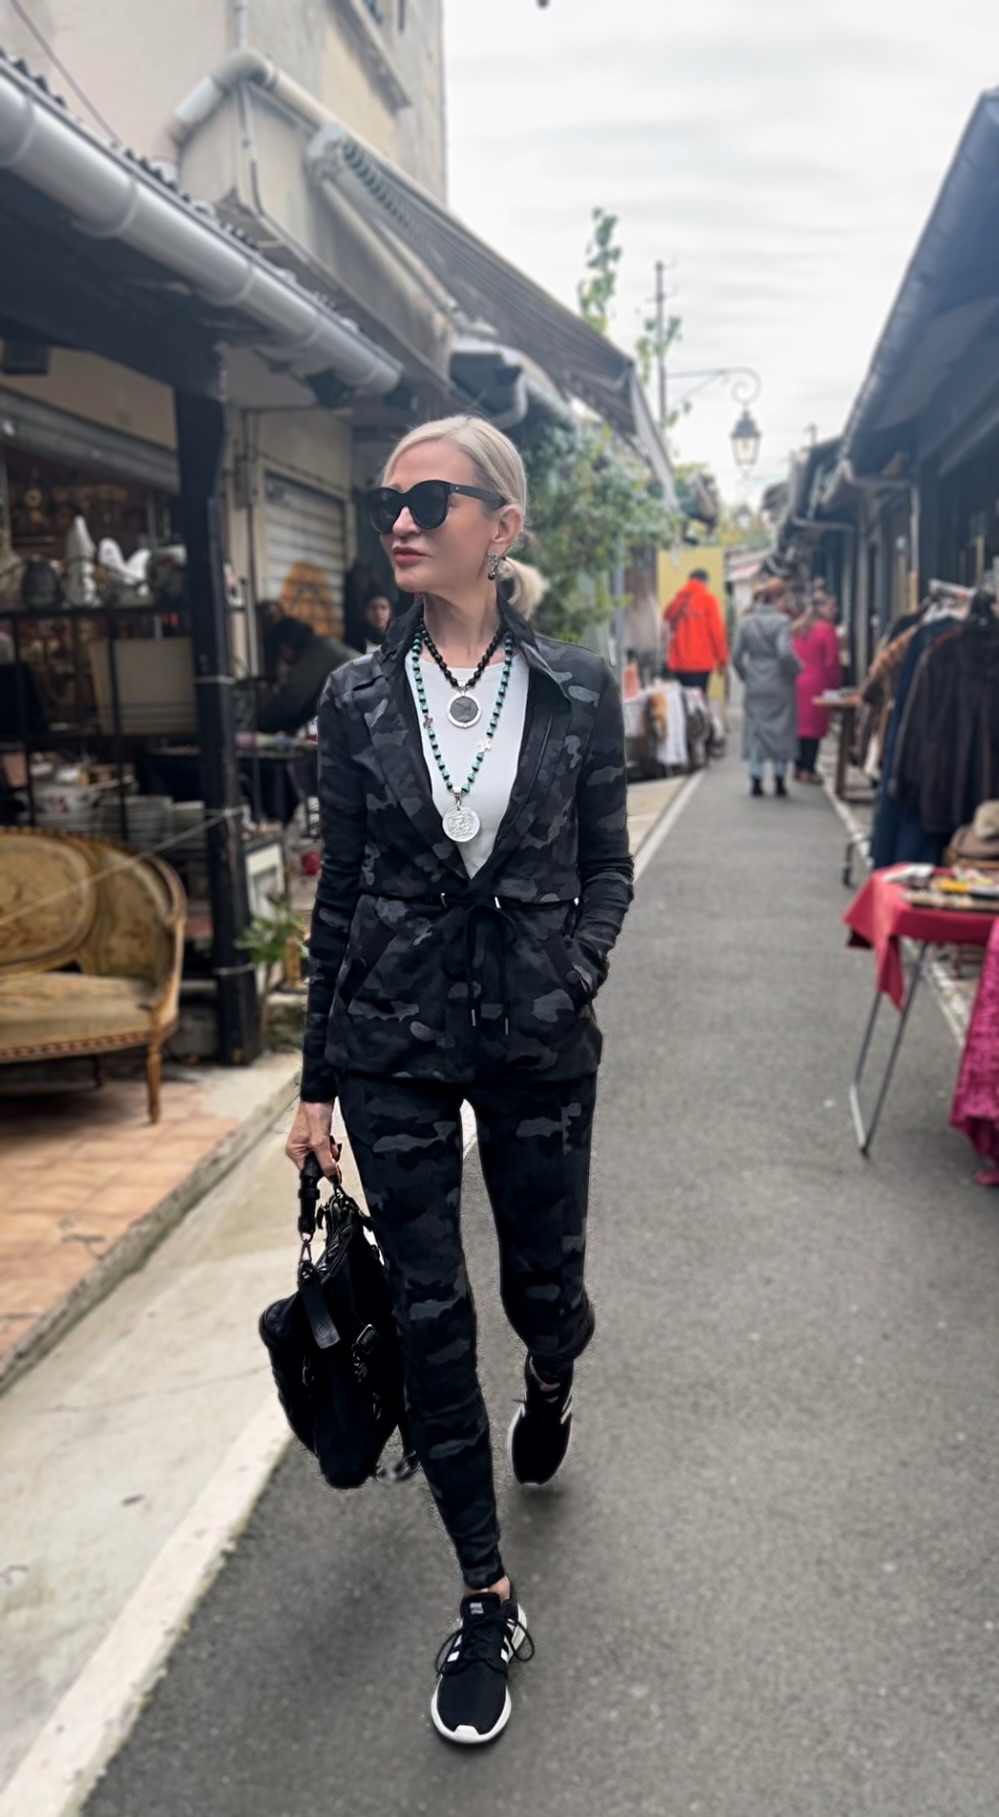 Lifestyle Influencer, Jamie Lewinger of More than Turquoise at Marche puces saint ouen 